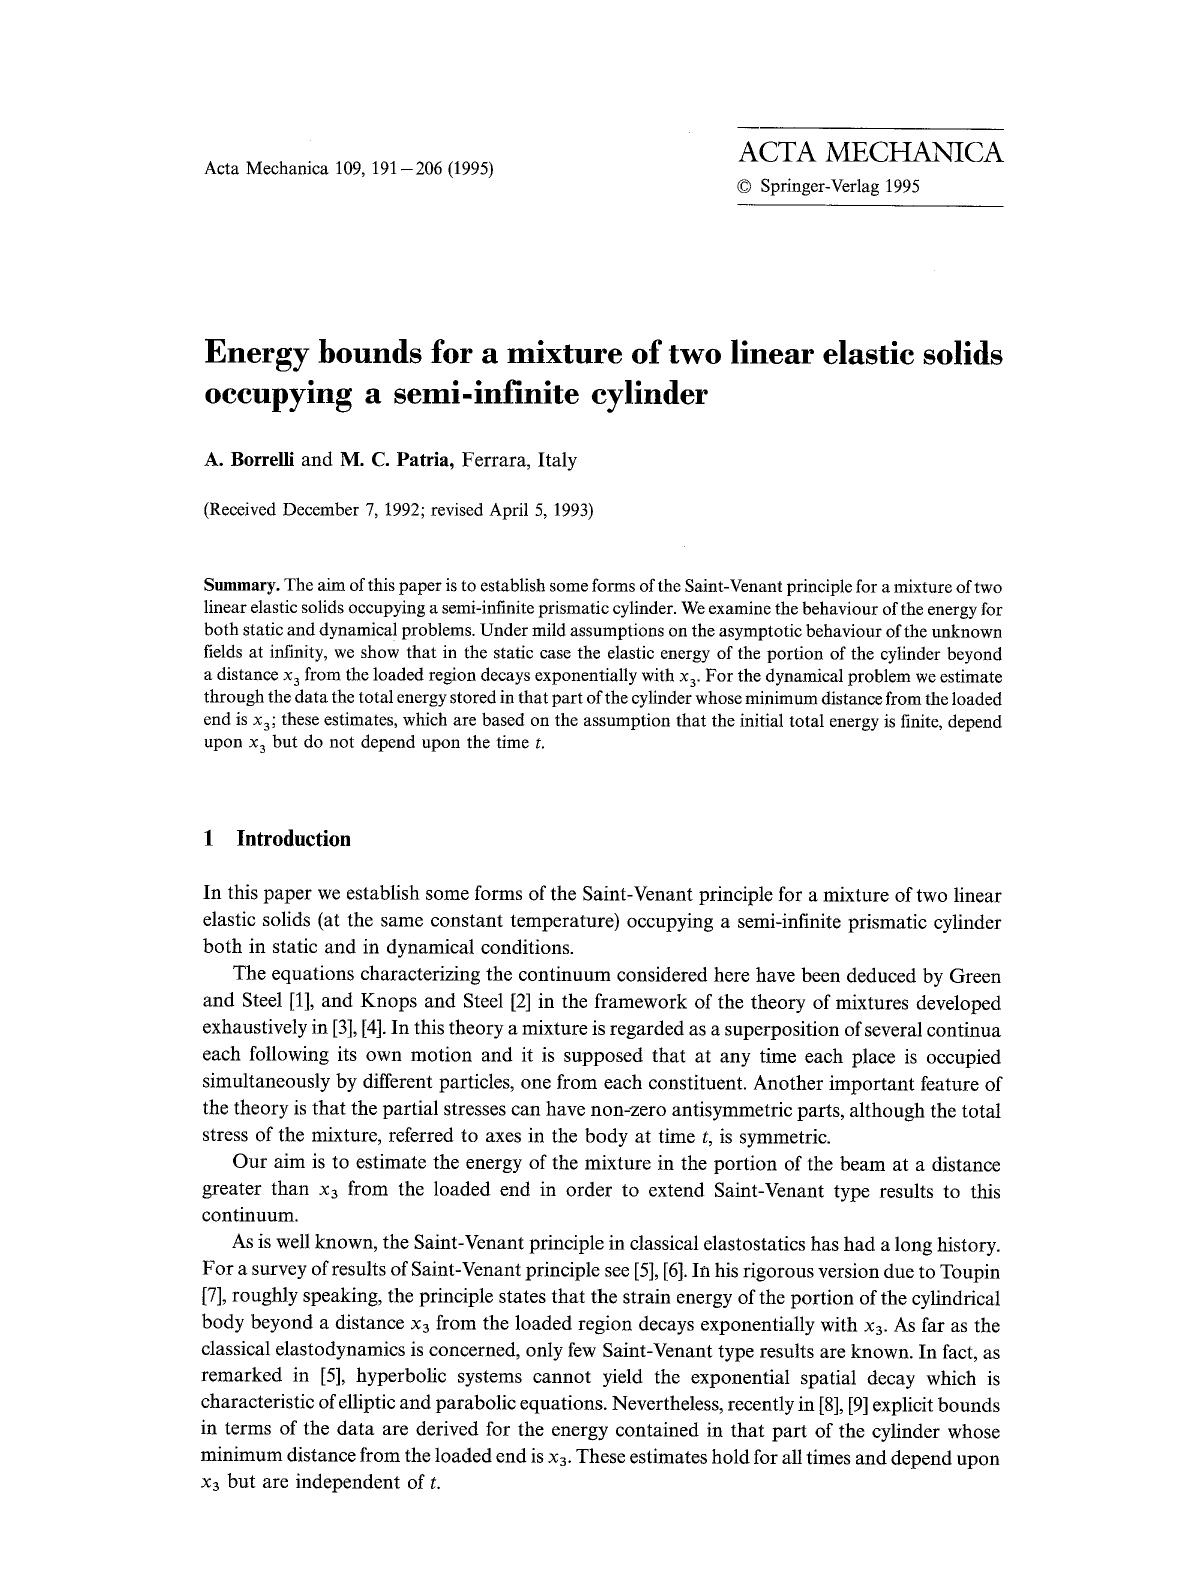 Energy bounds for a mixture of two linear elastic solids occupying a semi-infinite cylinder by Unknown